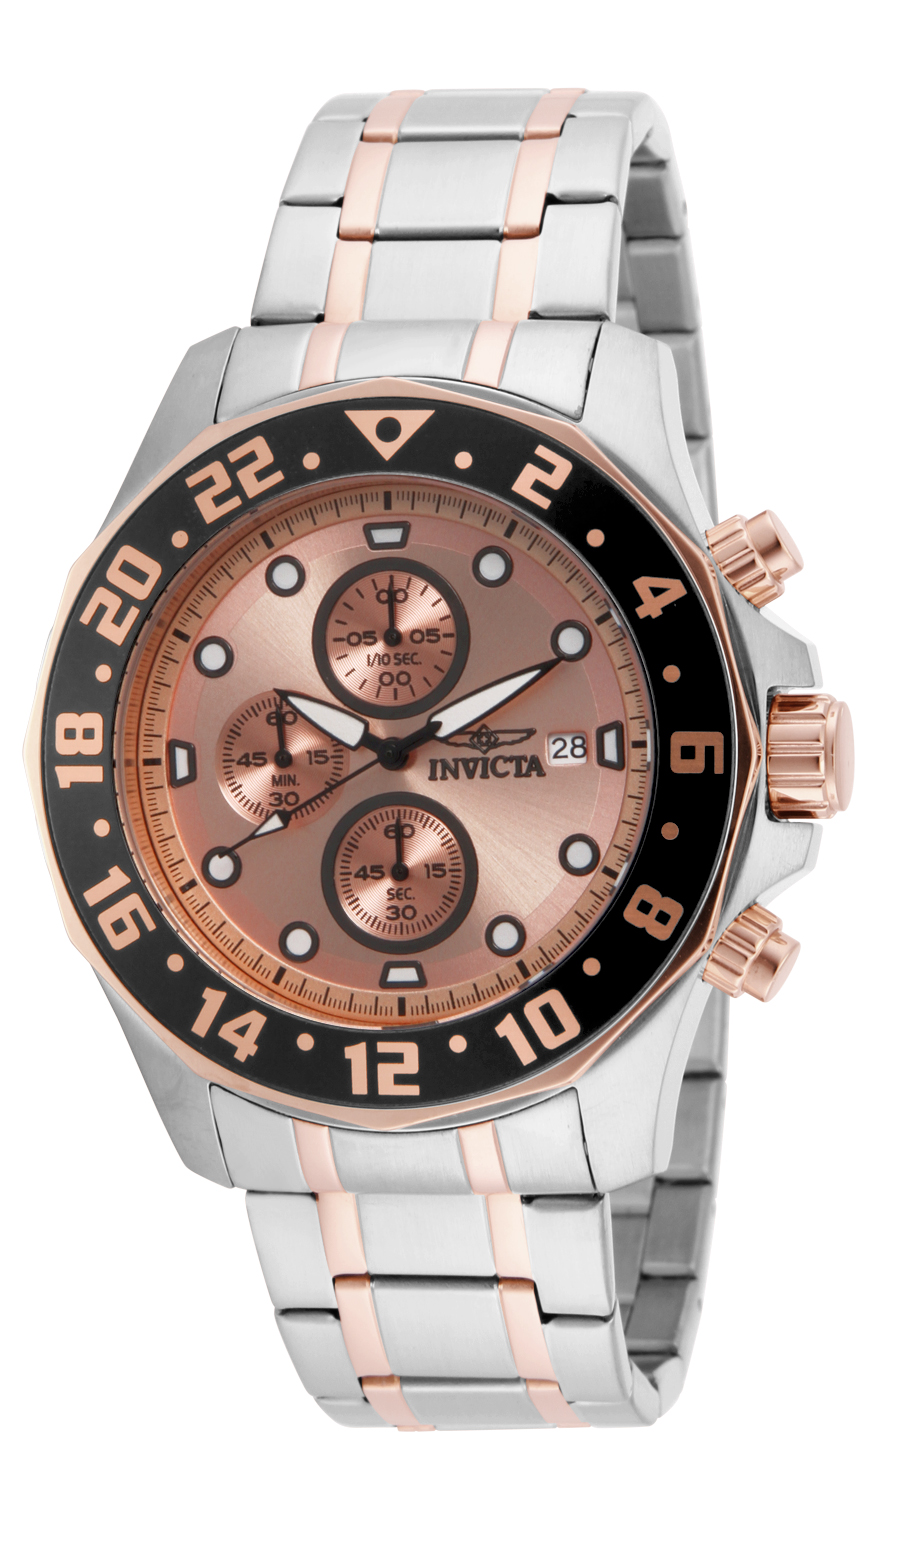 Invicta Specialty Men's Watch - 48mm, Steel, Rose Gold (15941)